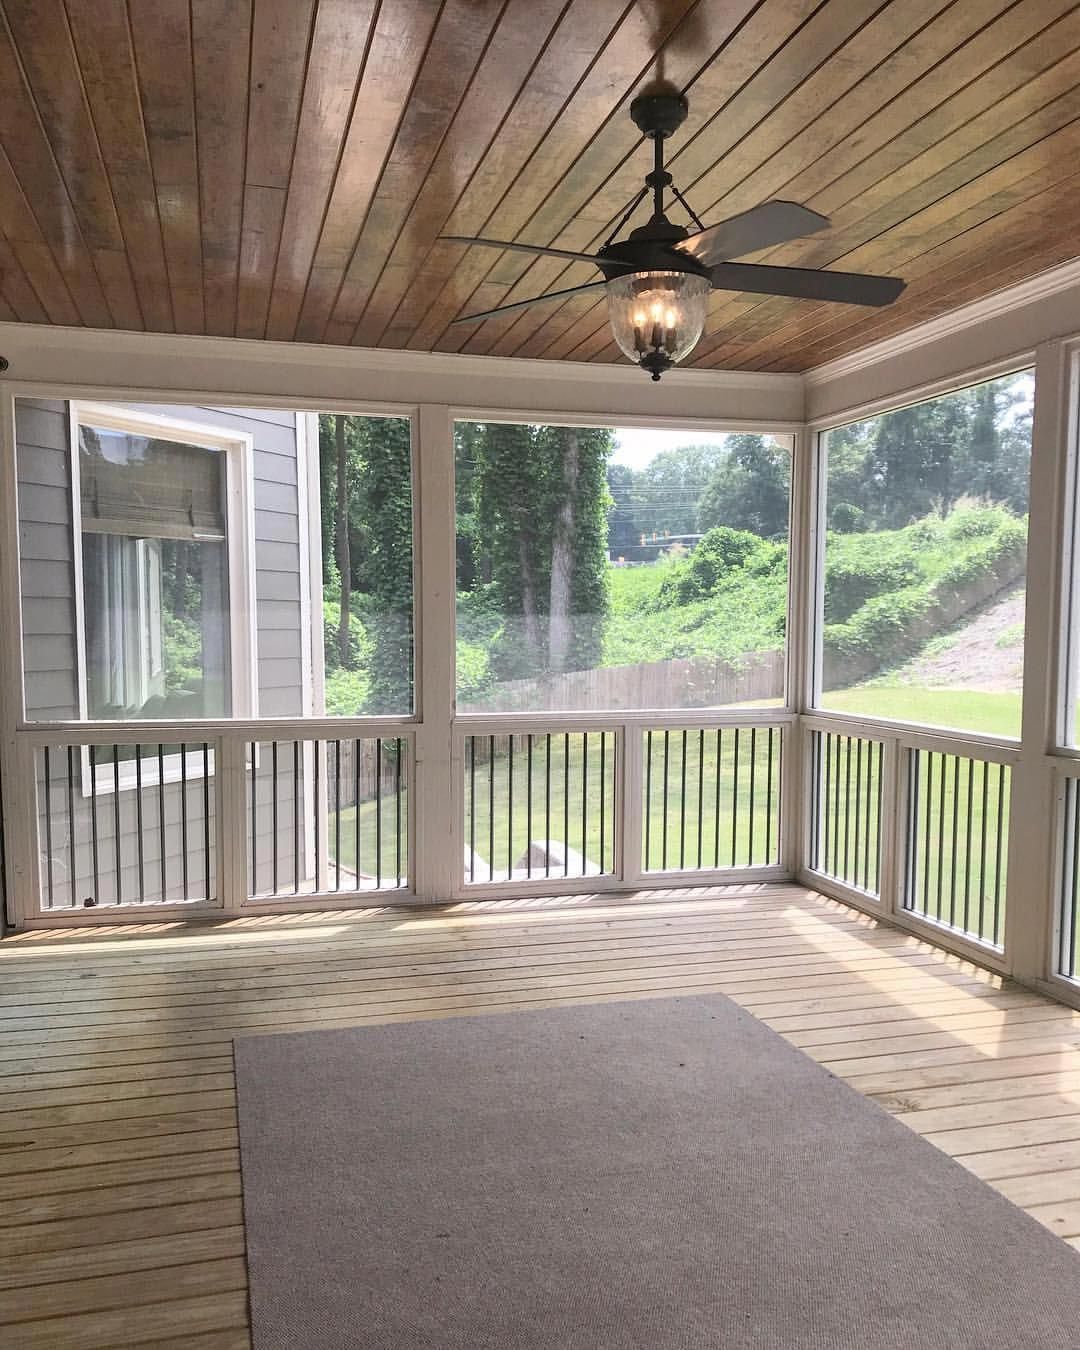 I asked yâall if we should paint or stain this screened porch floor ...